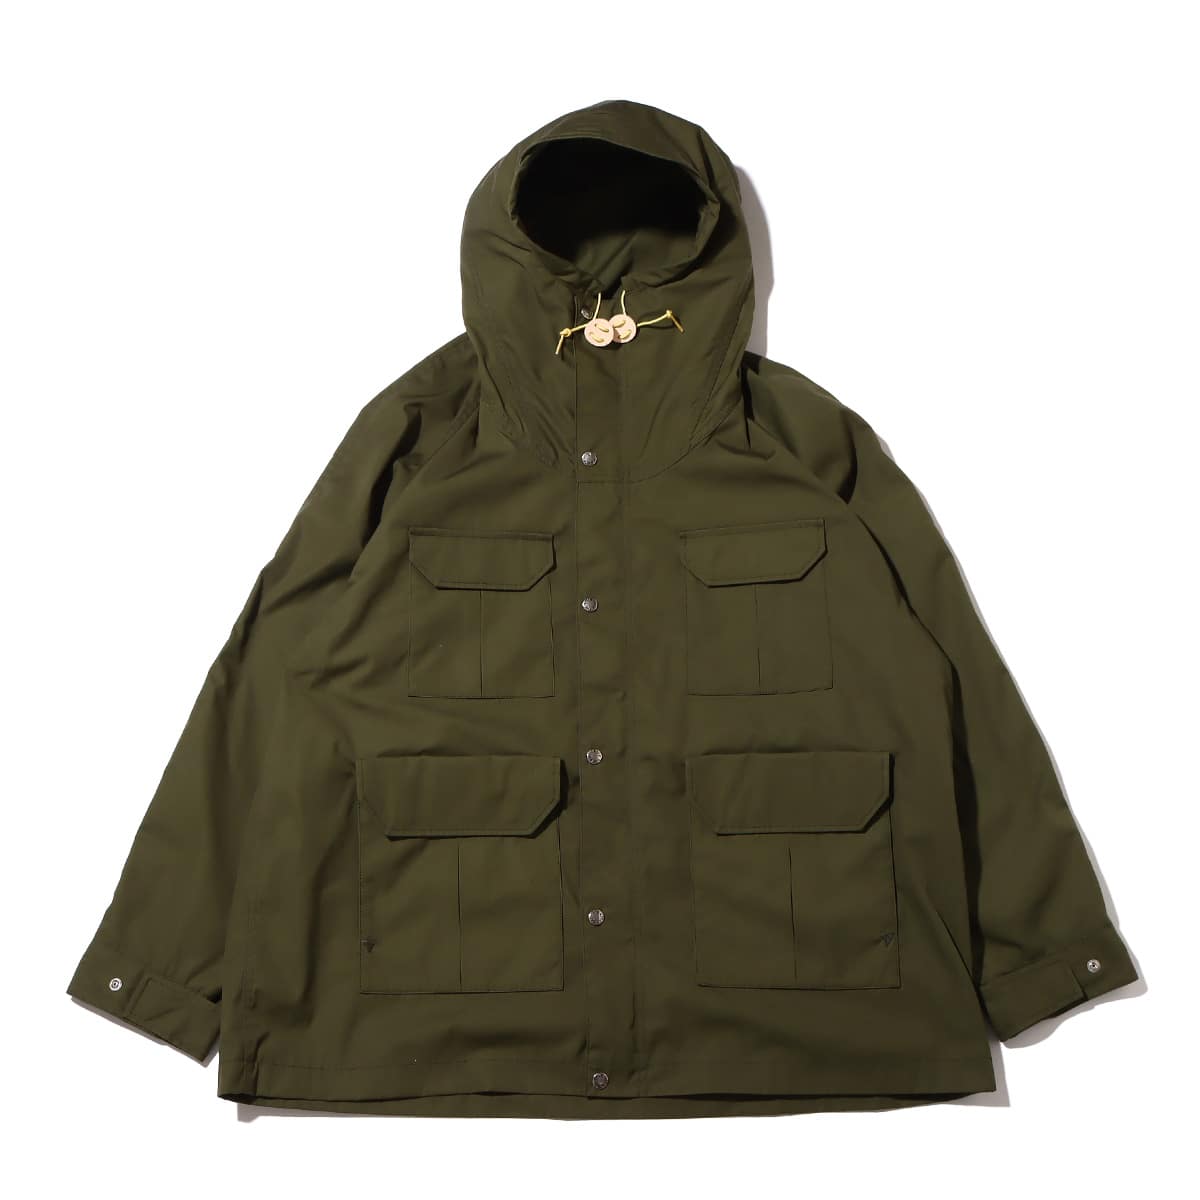 THE NORTH FACE PURPLE LABEL 65/35 Big Mountain Parka Olive 23SS-I